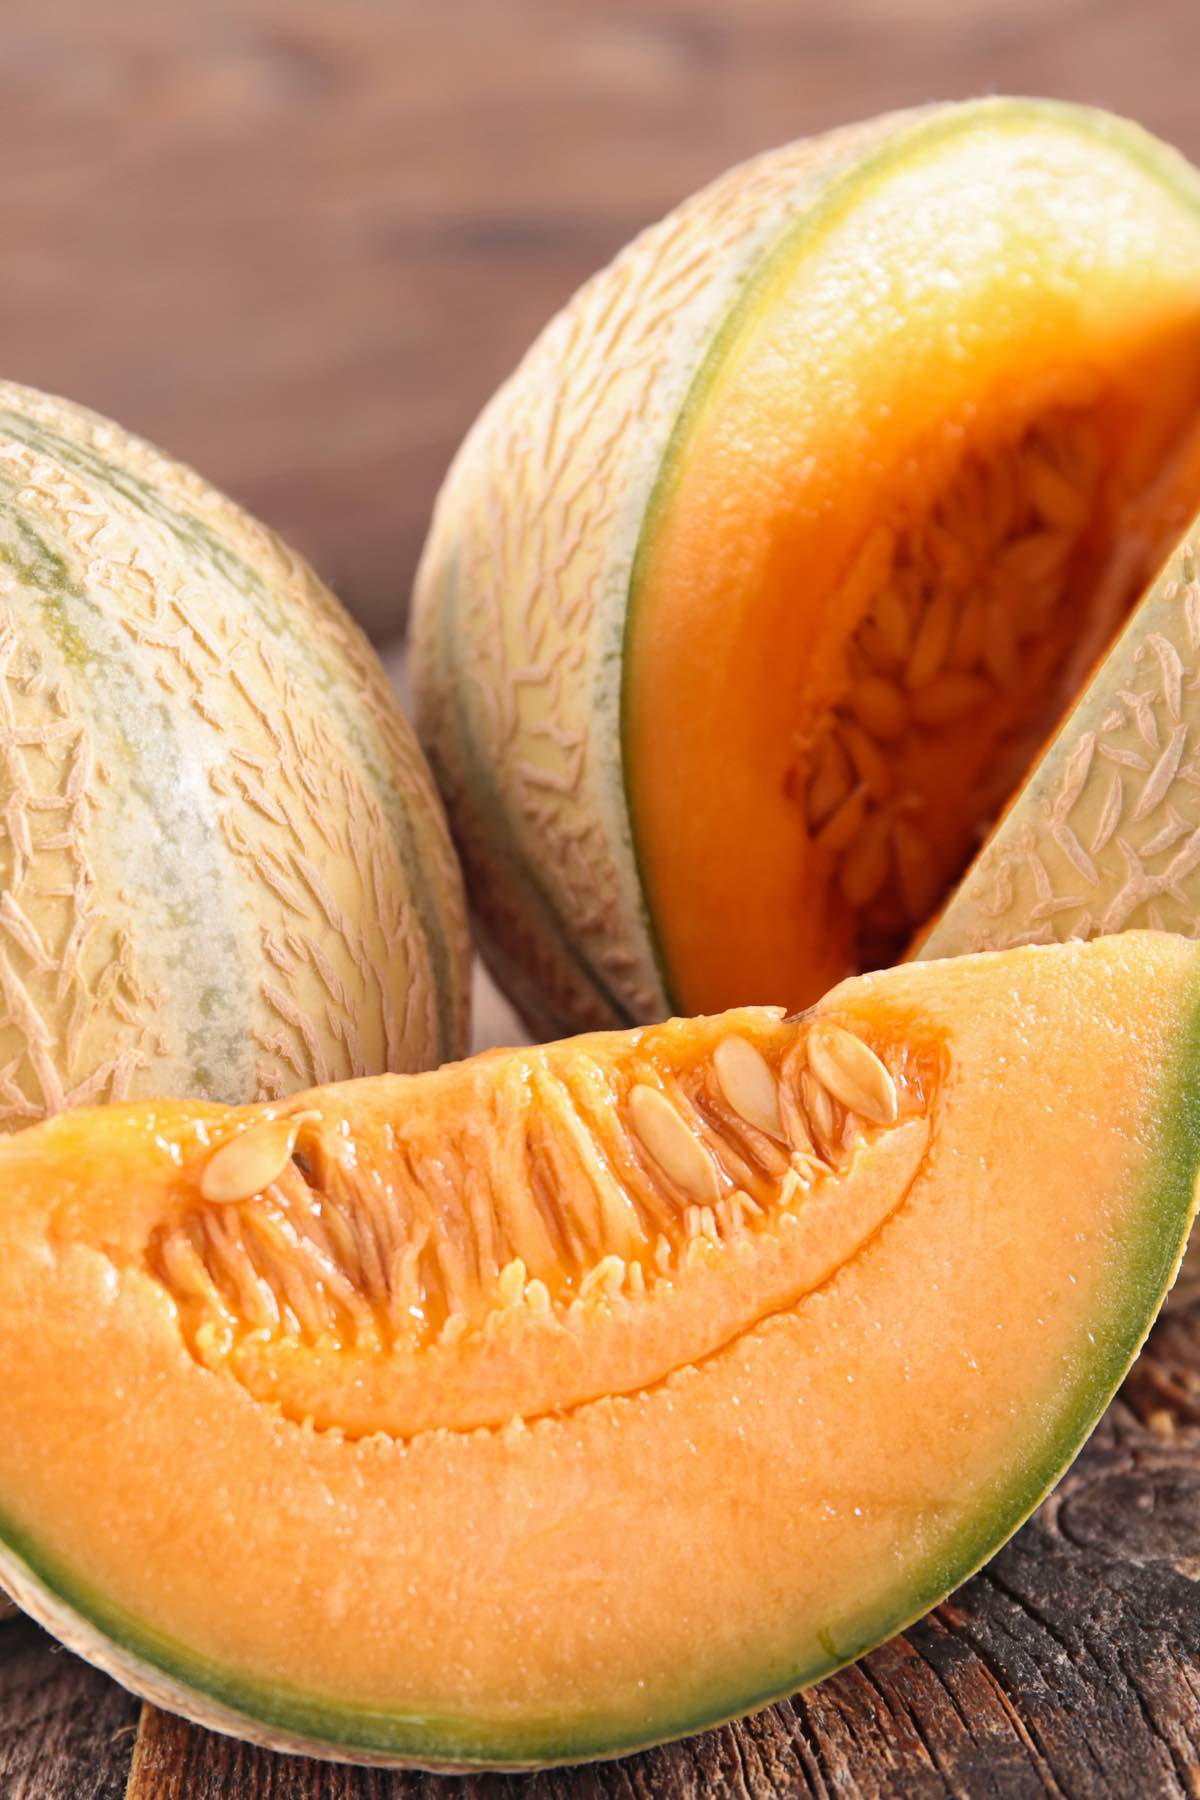 Wedges of ripe cantaloupe with bright, coral-colored flesh